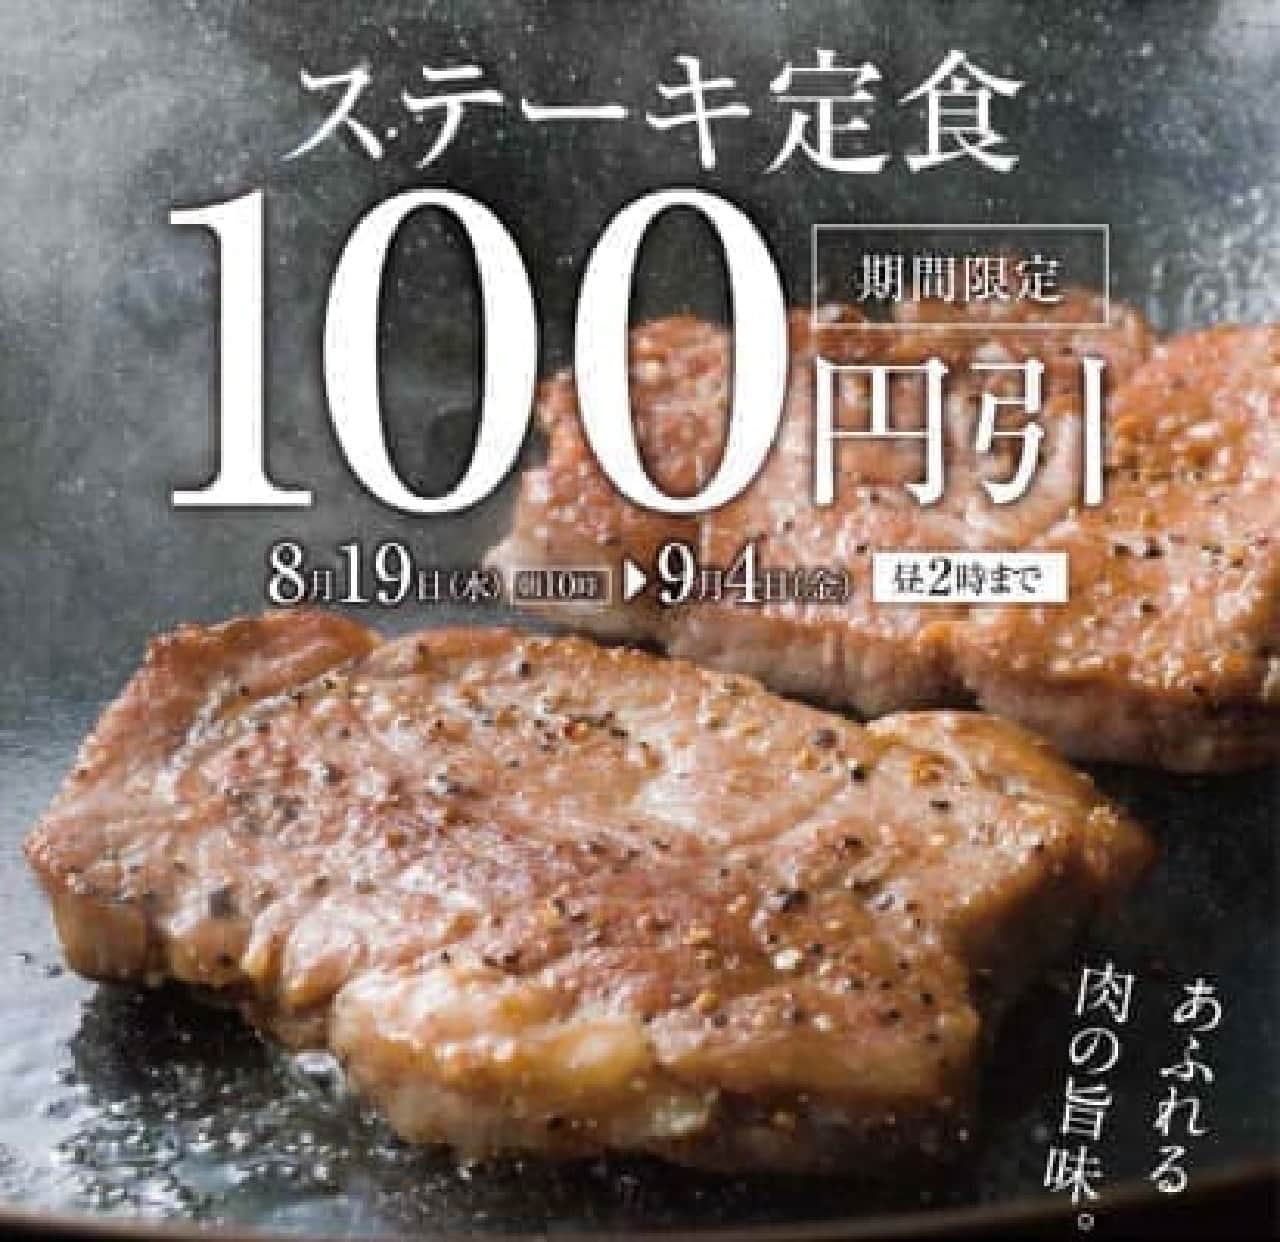 A chance to eat gutsuri meat at a great price!